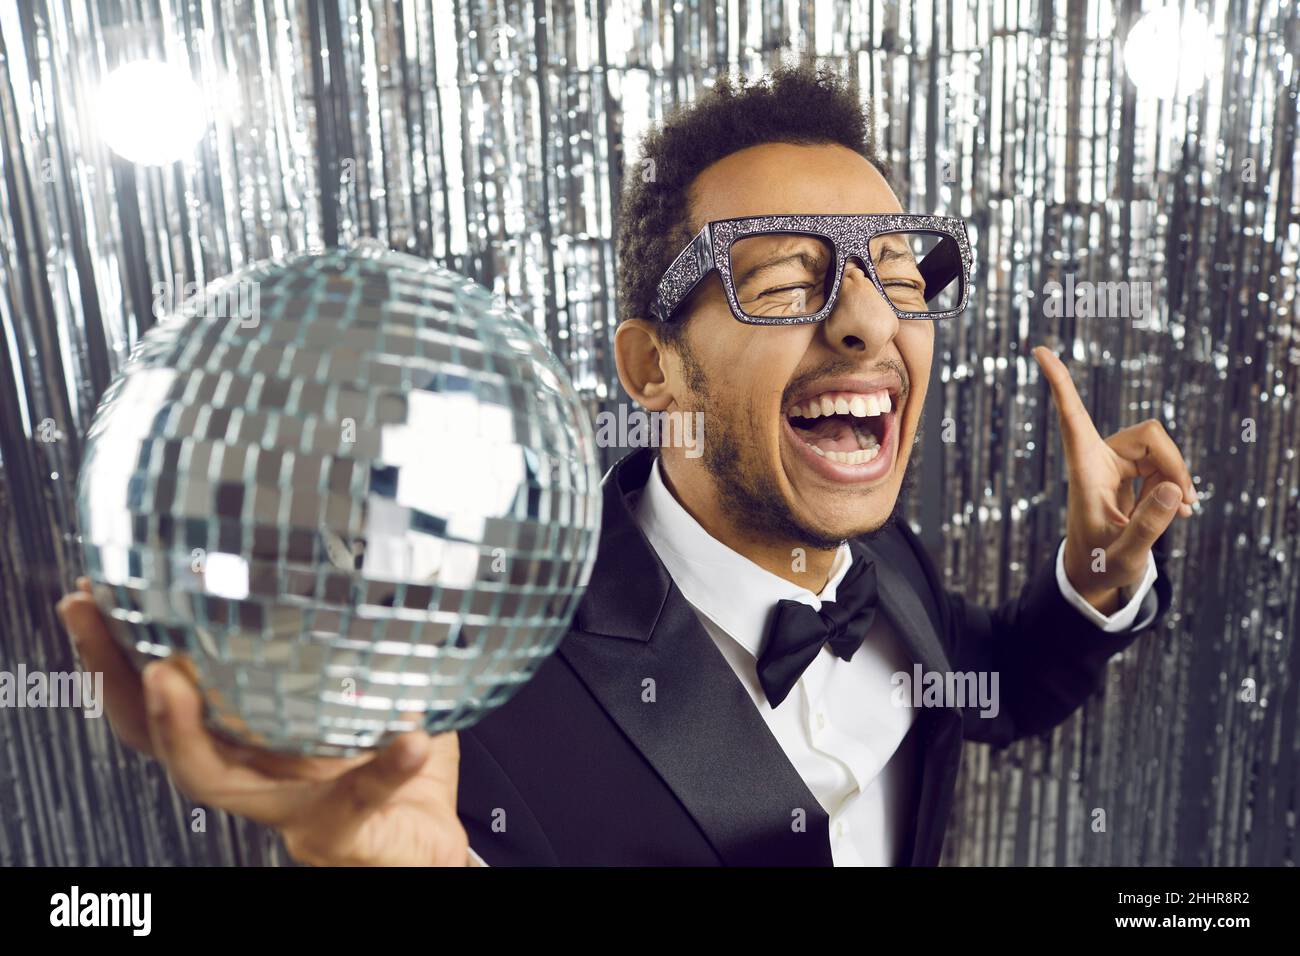 Happy funny ethnic young man in tuxedo and glasses dancing with disco ball at party Stock Photo